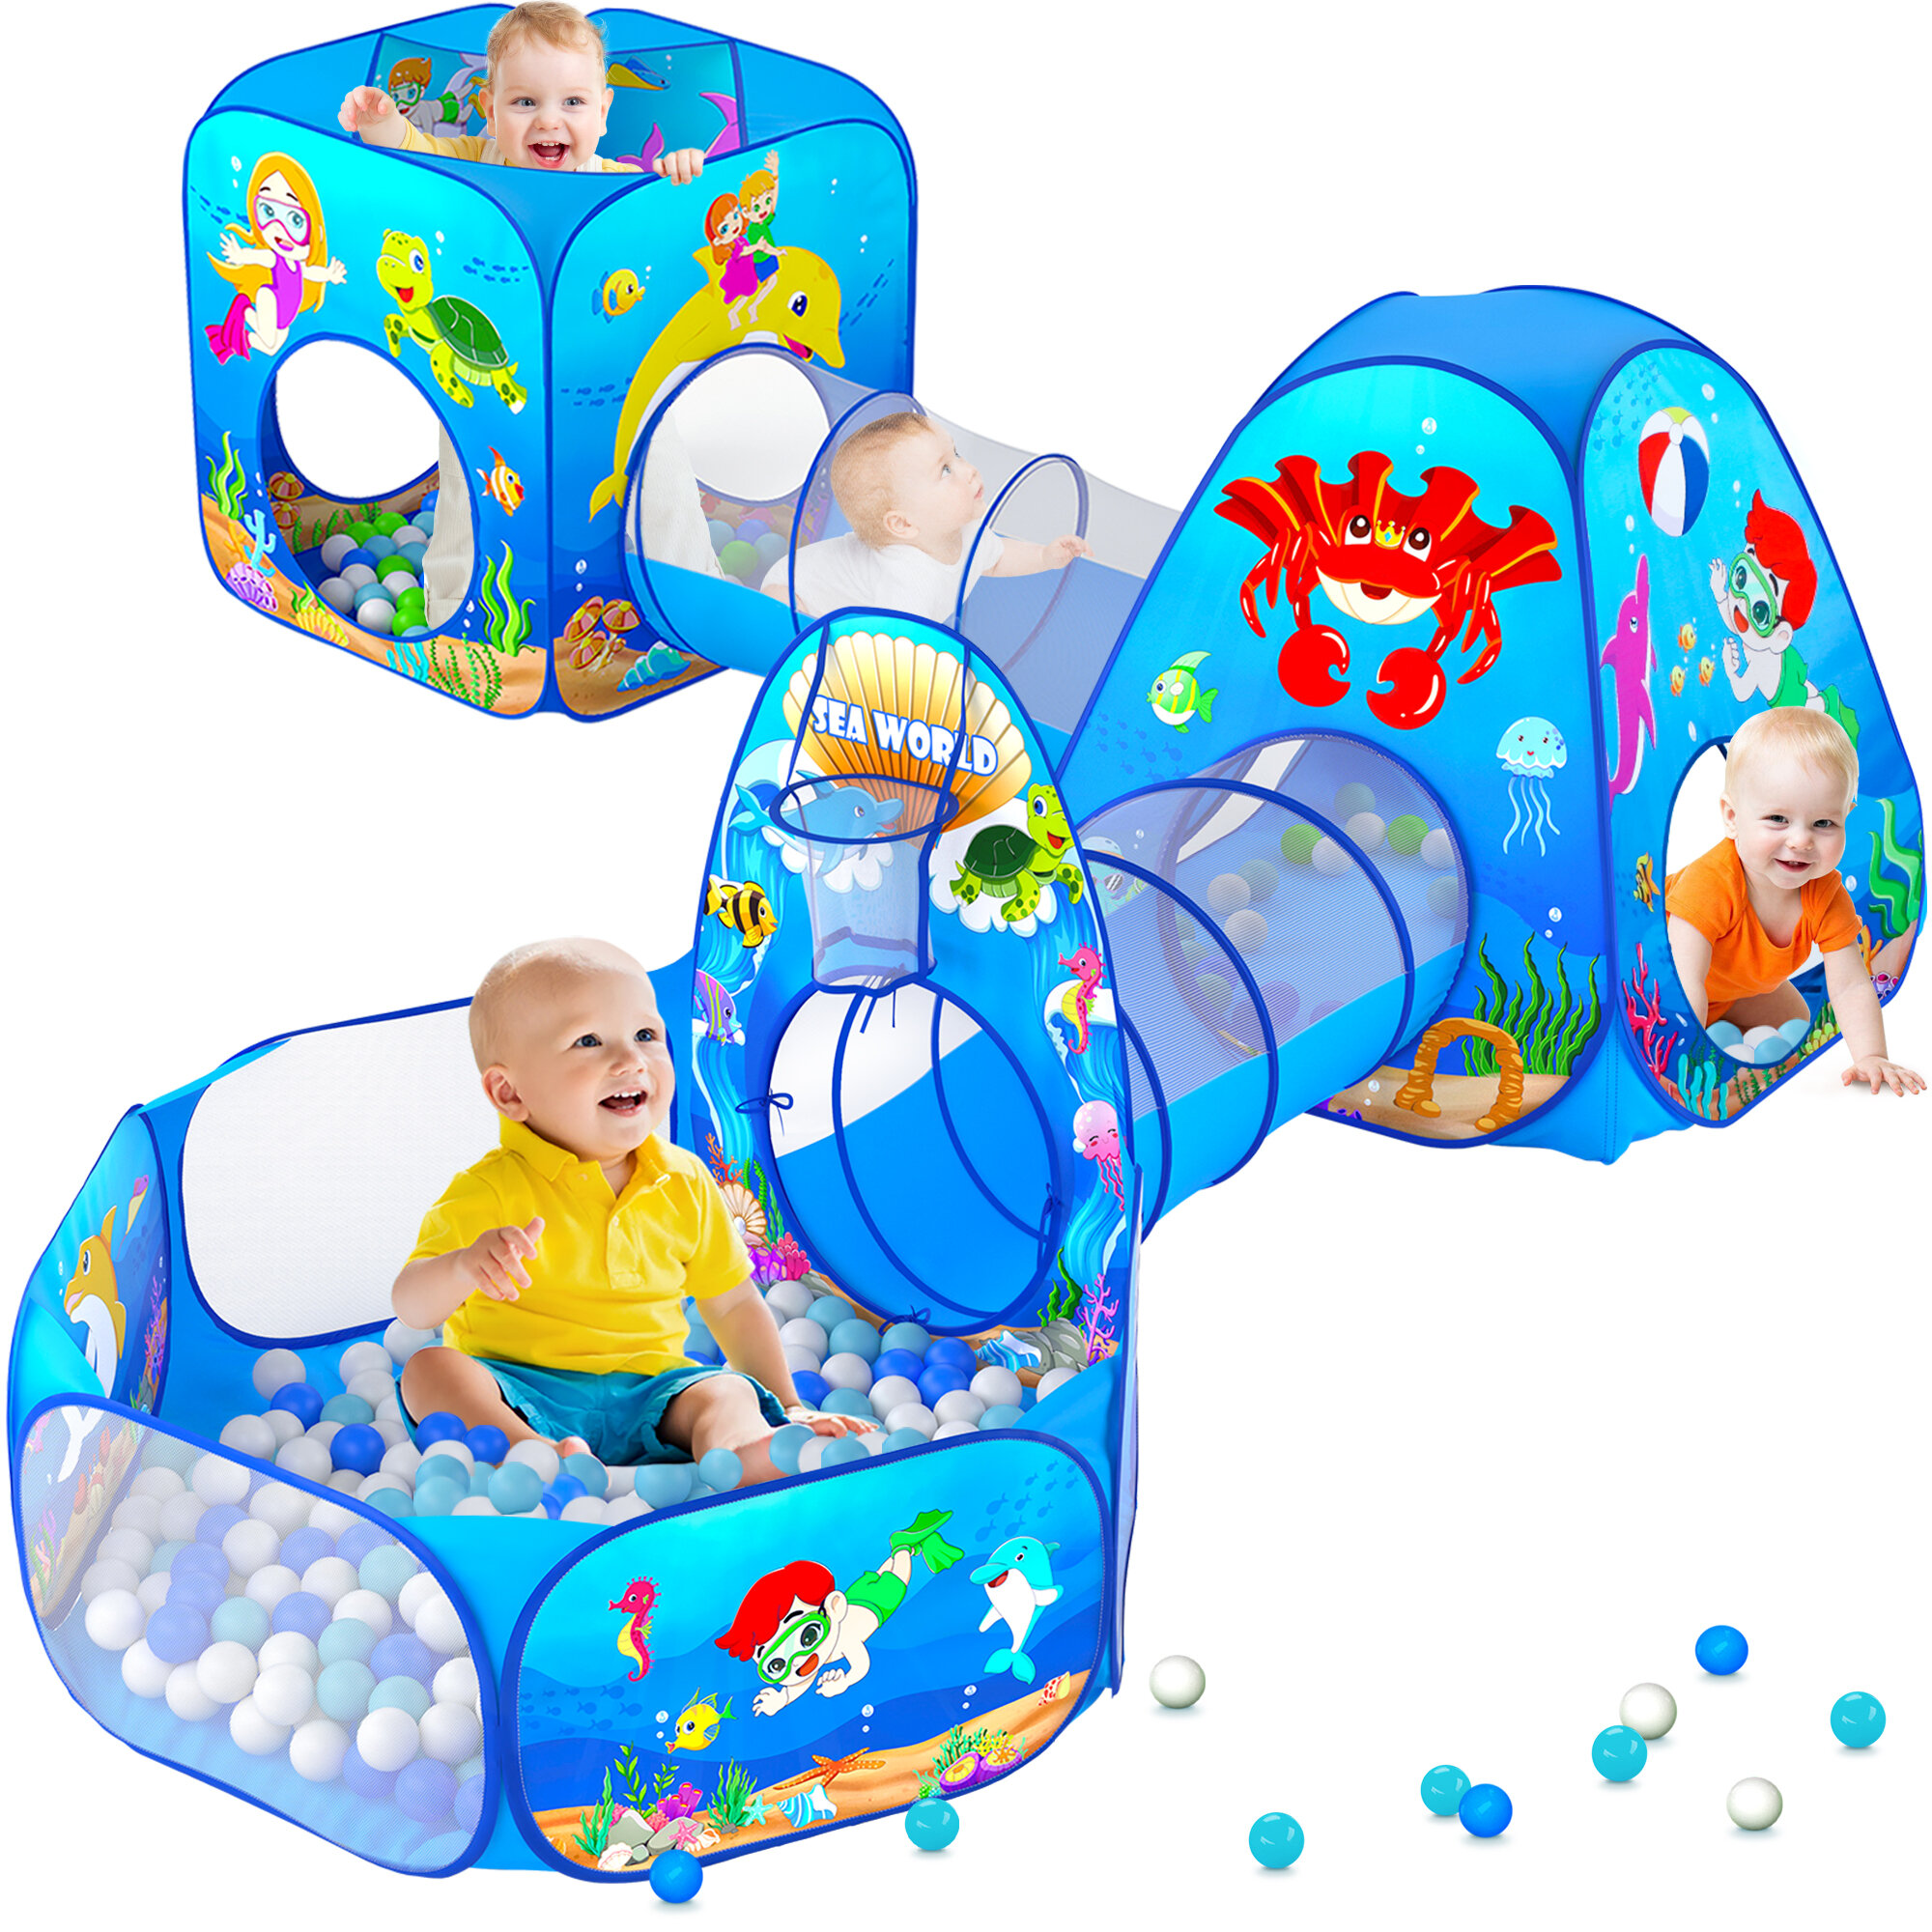 Kids Children Portable Ball Pit Pool Play Tent for Baby Boy Outdoor Game Toy PG 